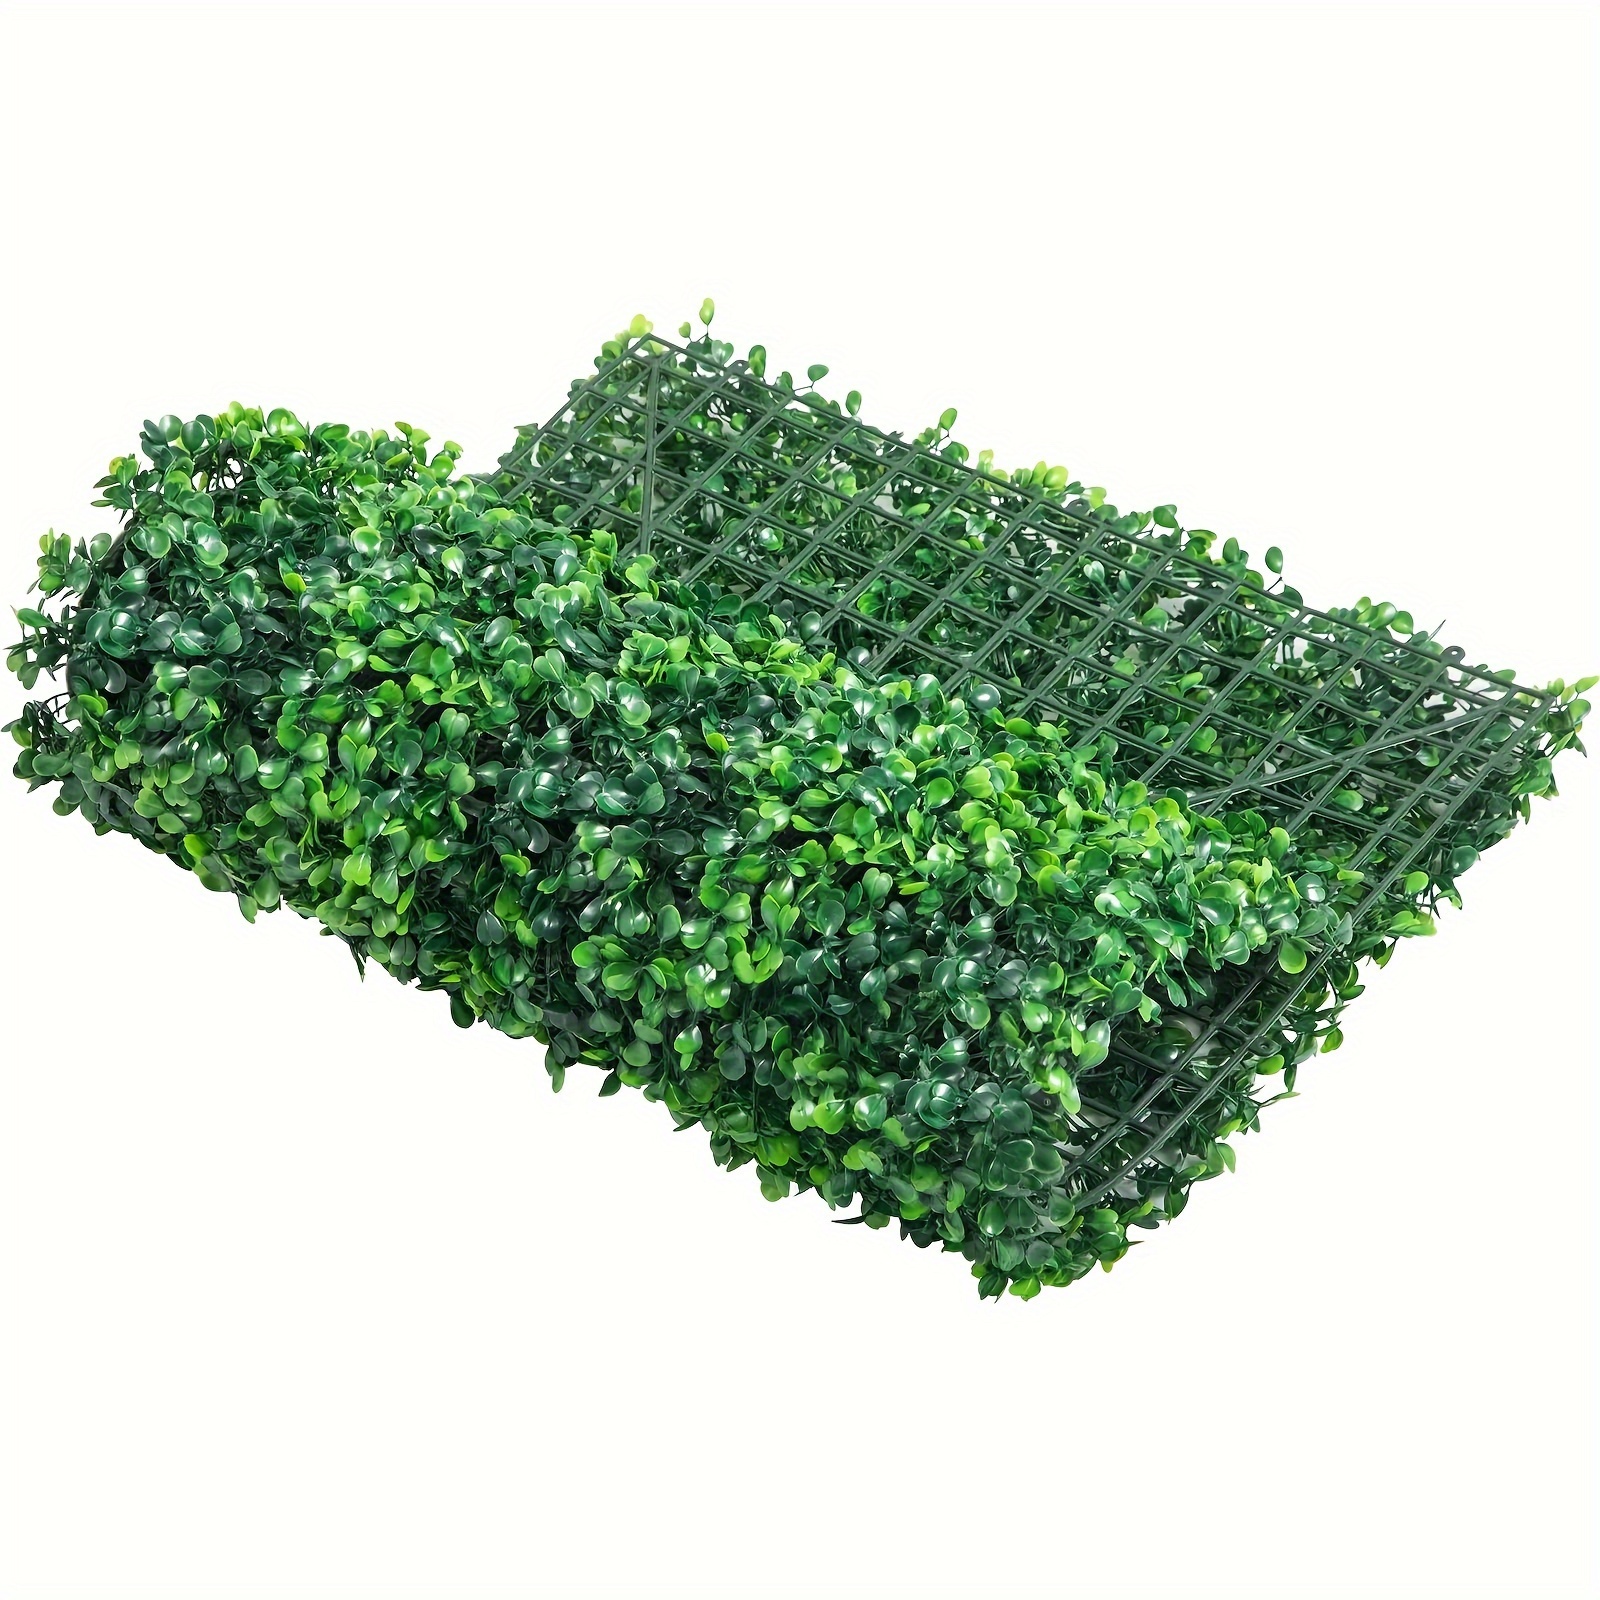 

Grass Wall Panels For 32 Sq Feet, Boxwood Hedge Wall Panels, Artificial Grass Backdrop Wall 1.6", Privacy Hedge Screen Uv Protected For Outdoor Indoor Garden Fence Backyard